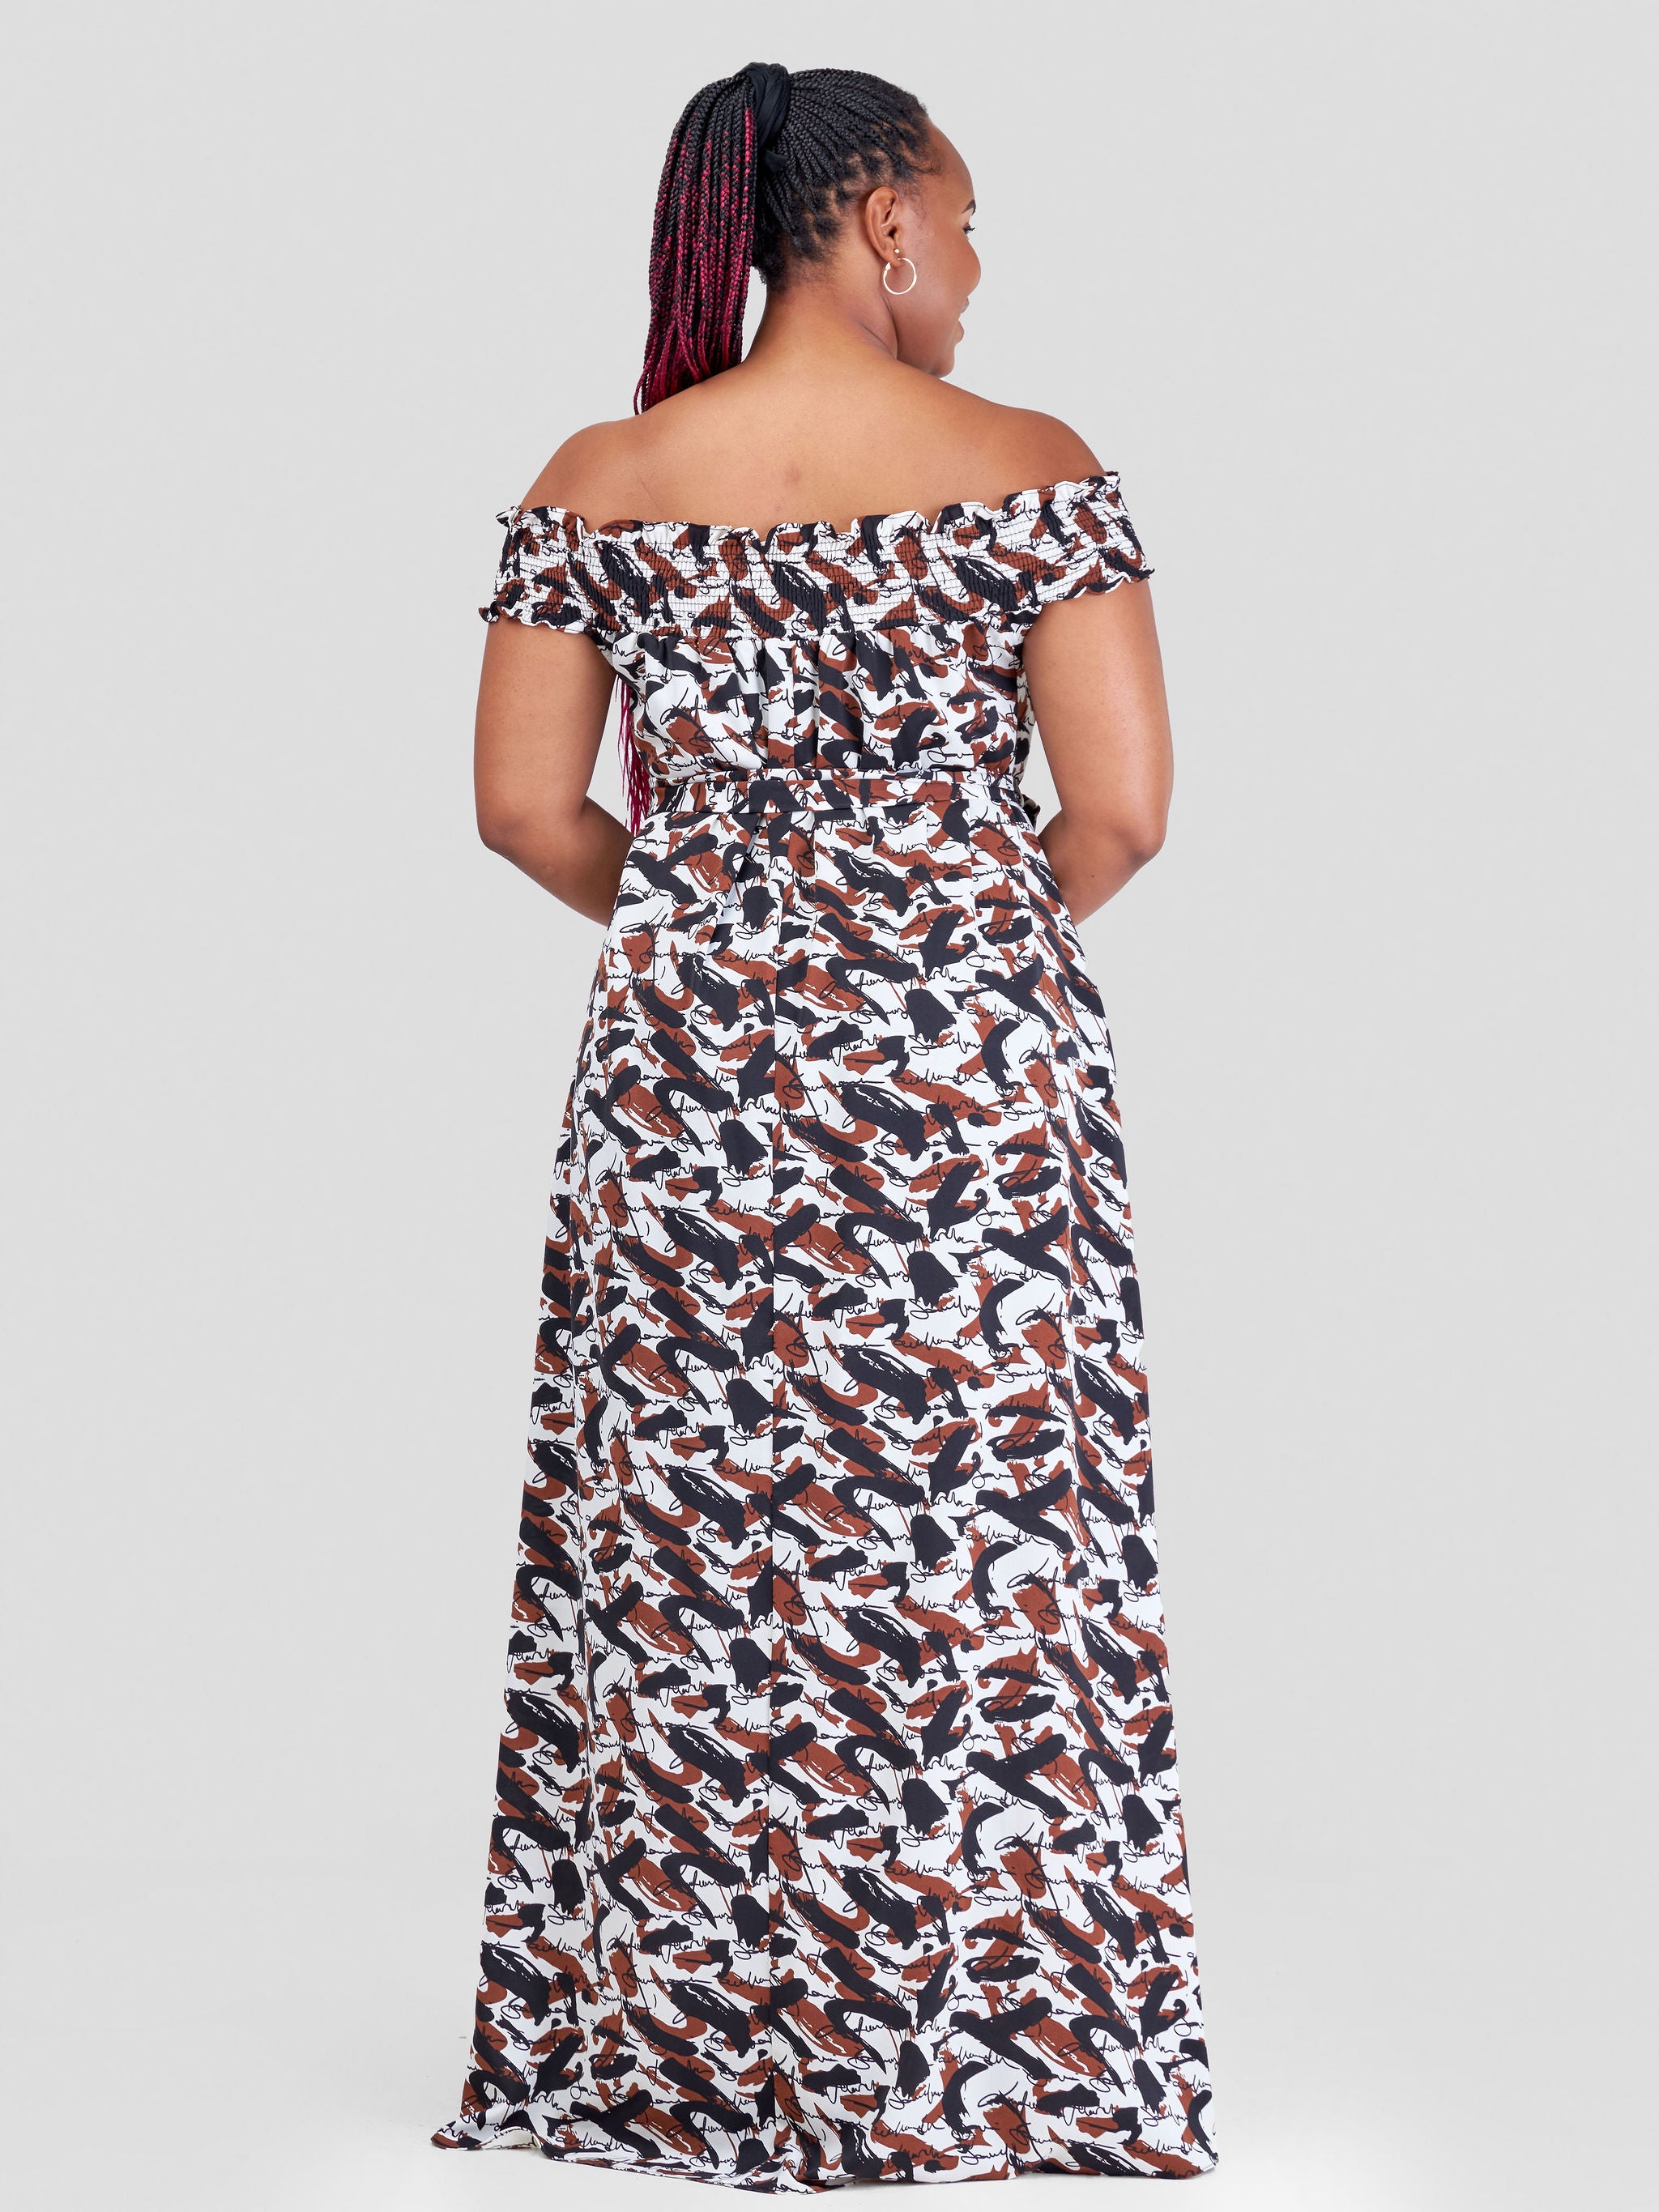 Black plus size dress with abstract print